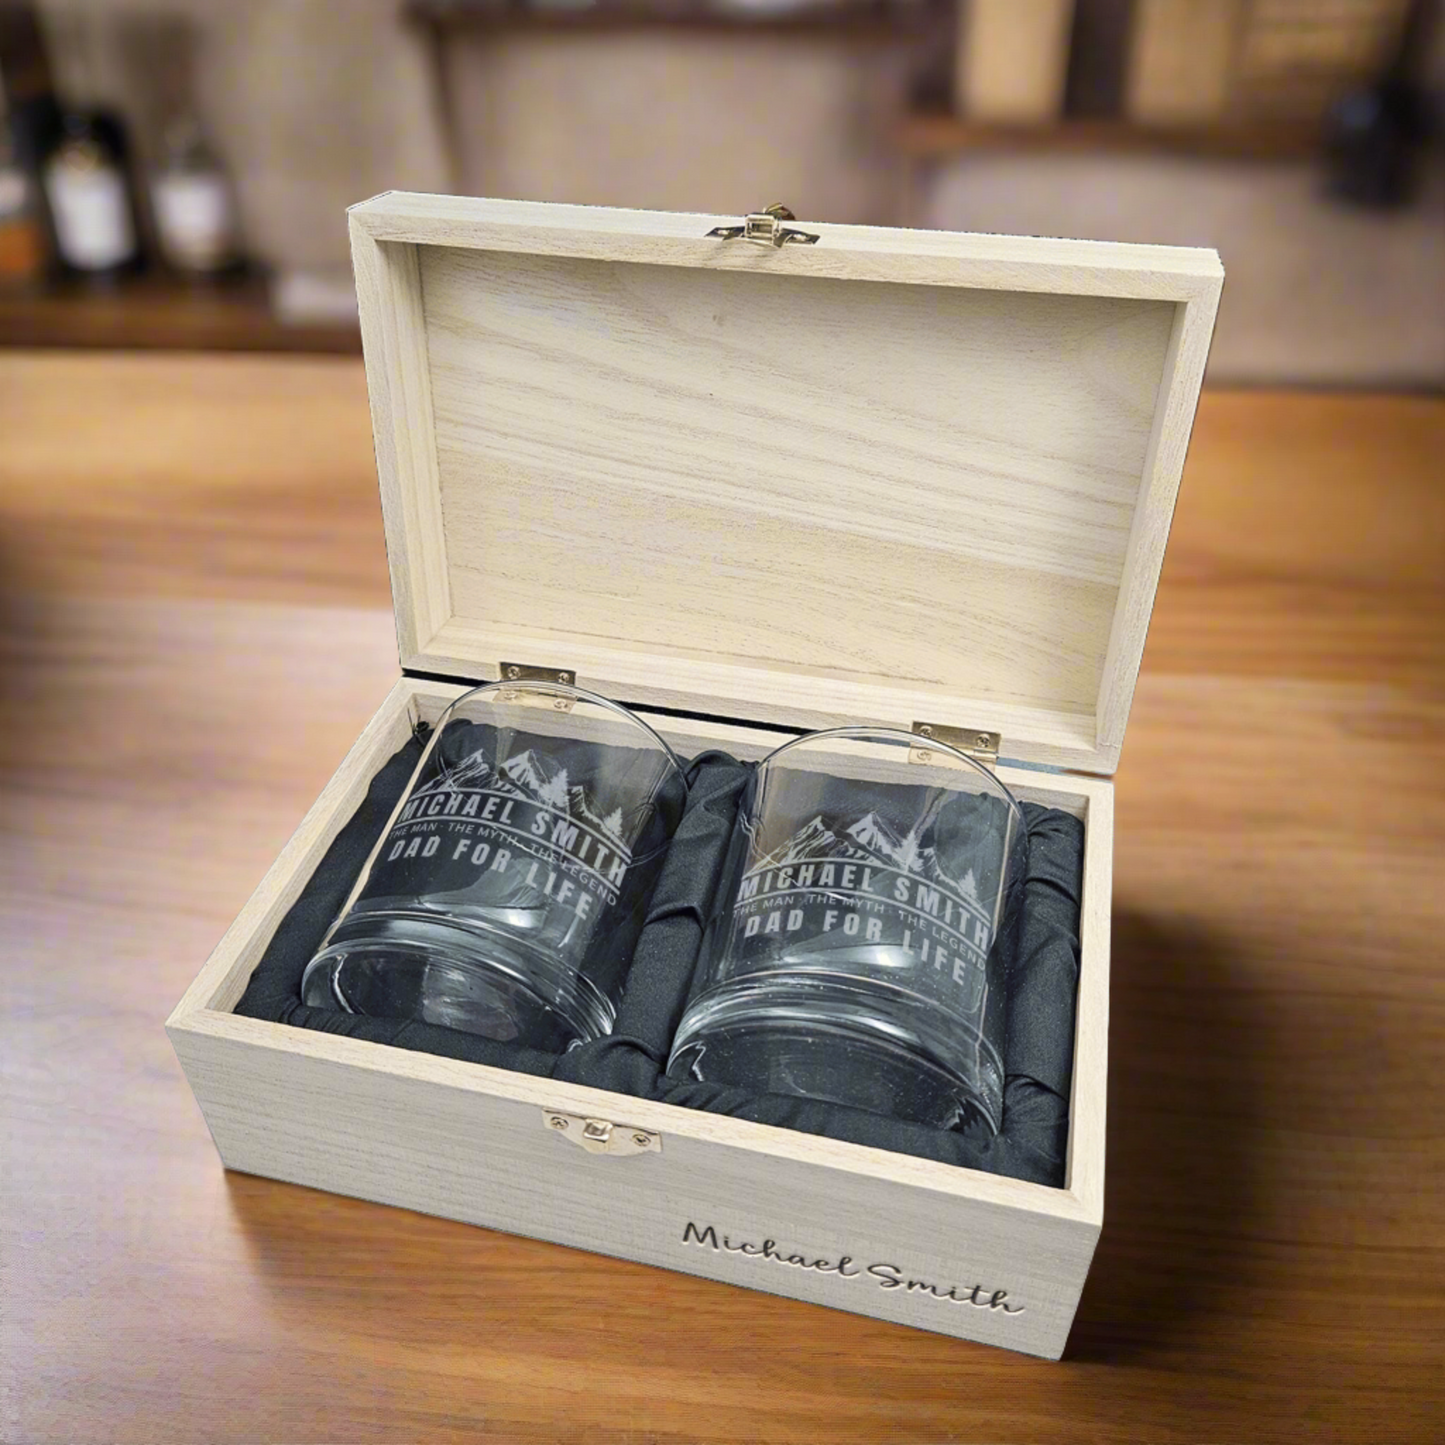 Personalized Whiskey Glasses Set with Wooden Box - Perfect Gift for the Outdoor Dad -DM065